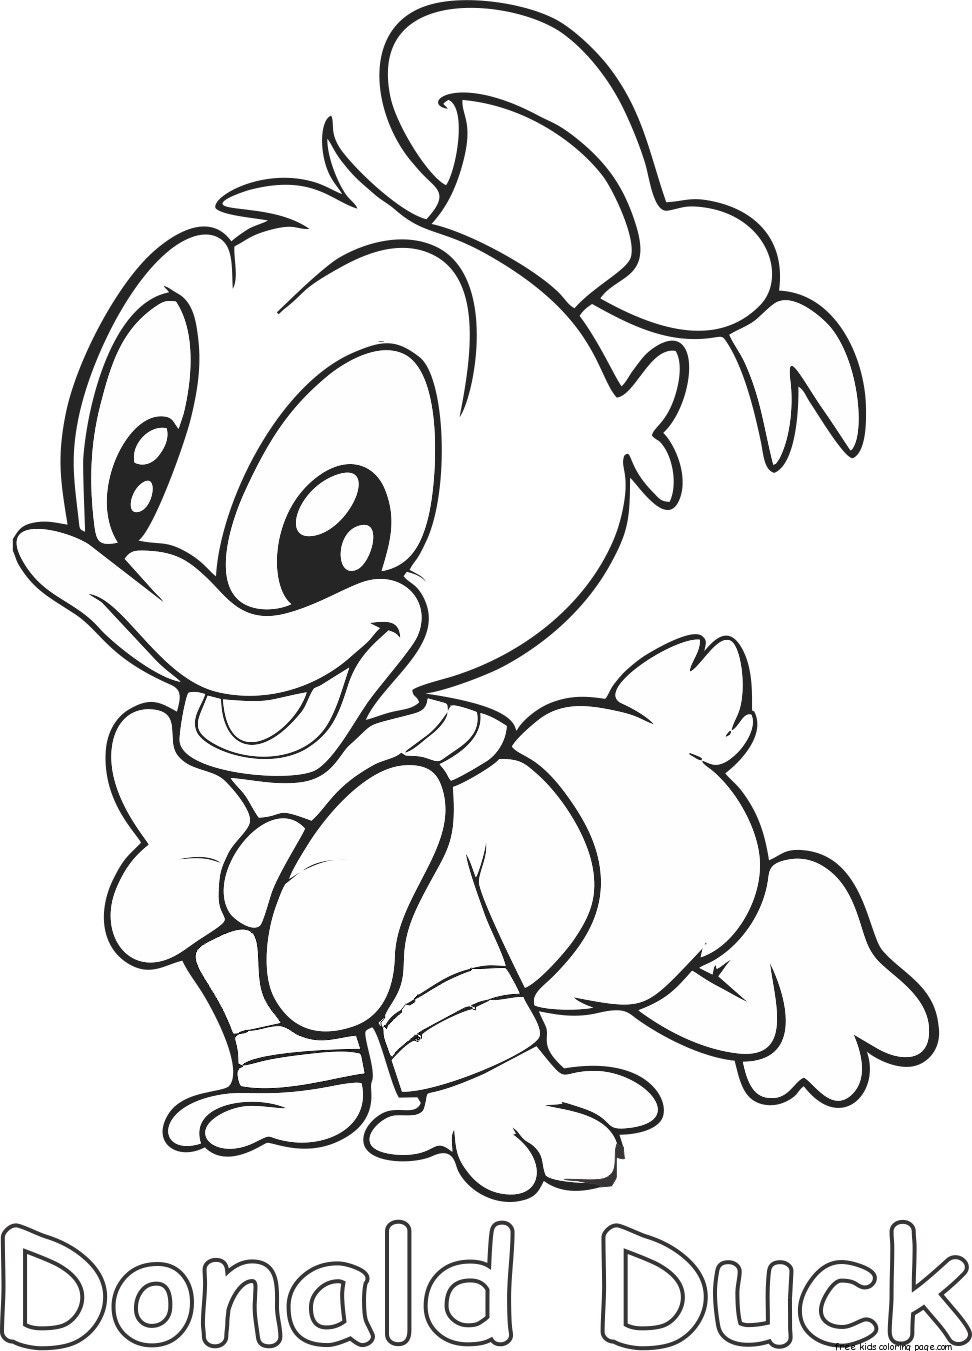 Baby Donald Duck Coloring Pages
 Duck Coloring Pages for Preschoolers